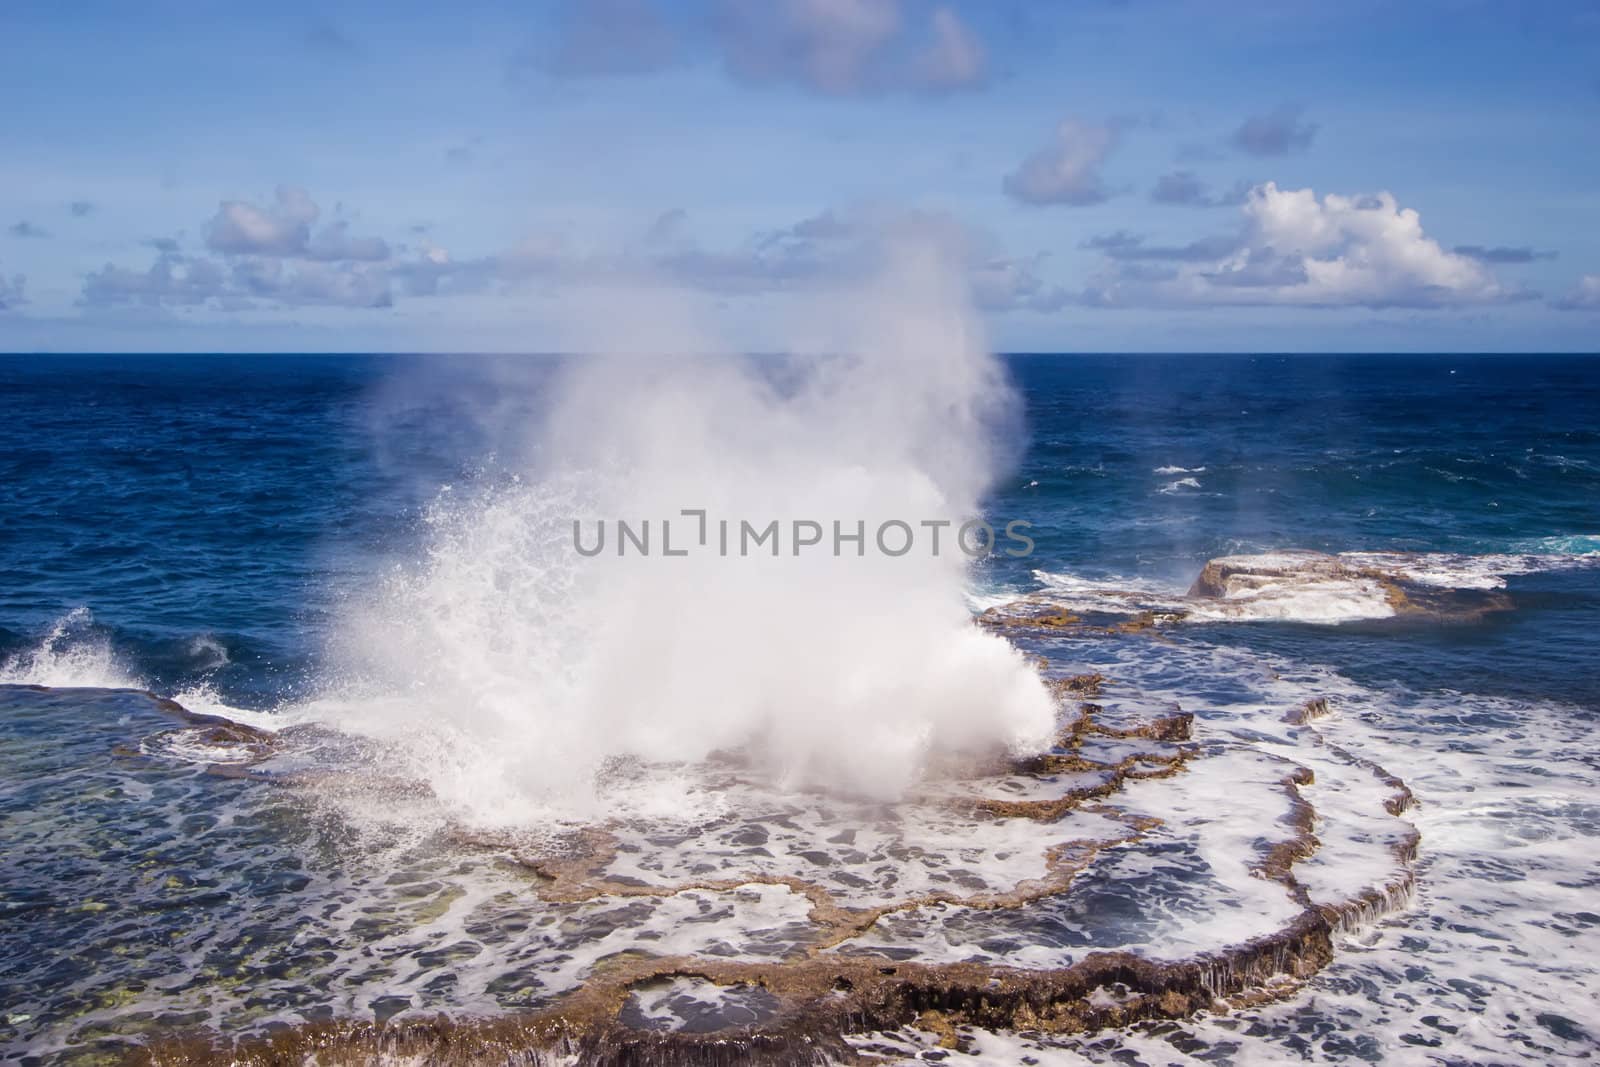 The blowholes put on a spectacular dispaly at Houma on the western side of Tongatapu Island in the Pacific.